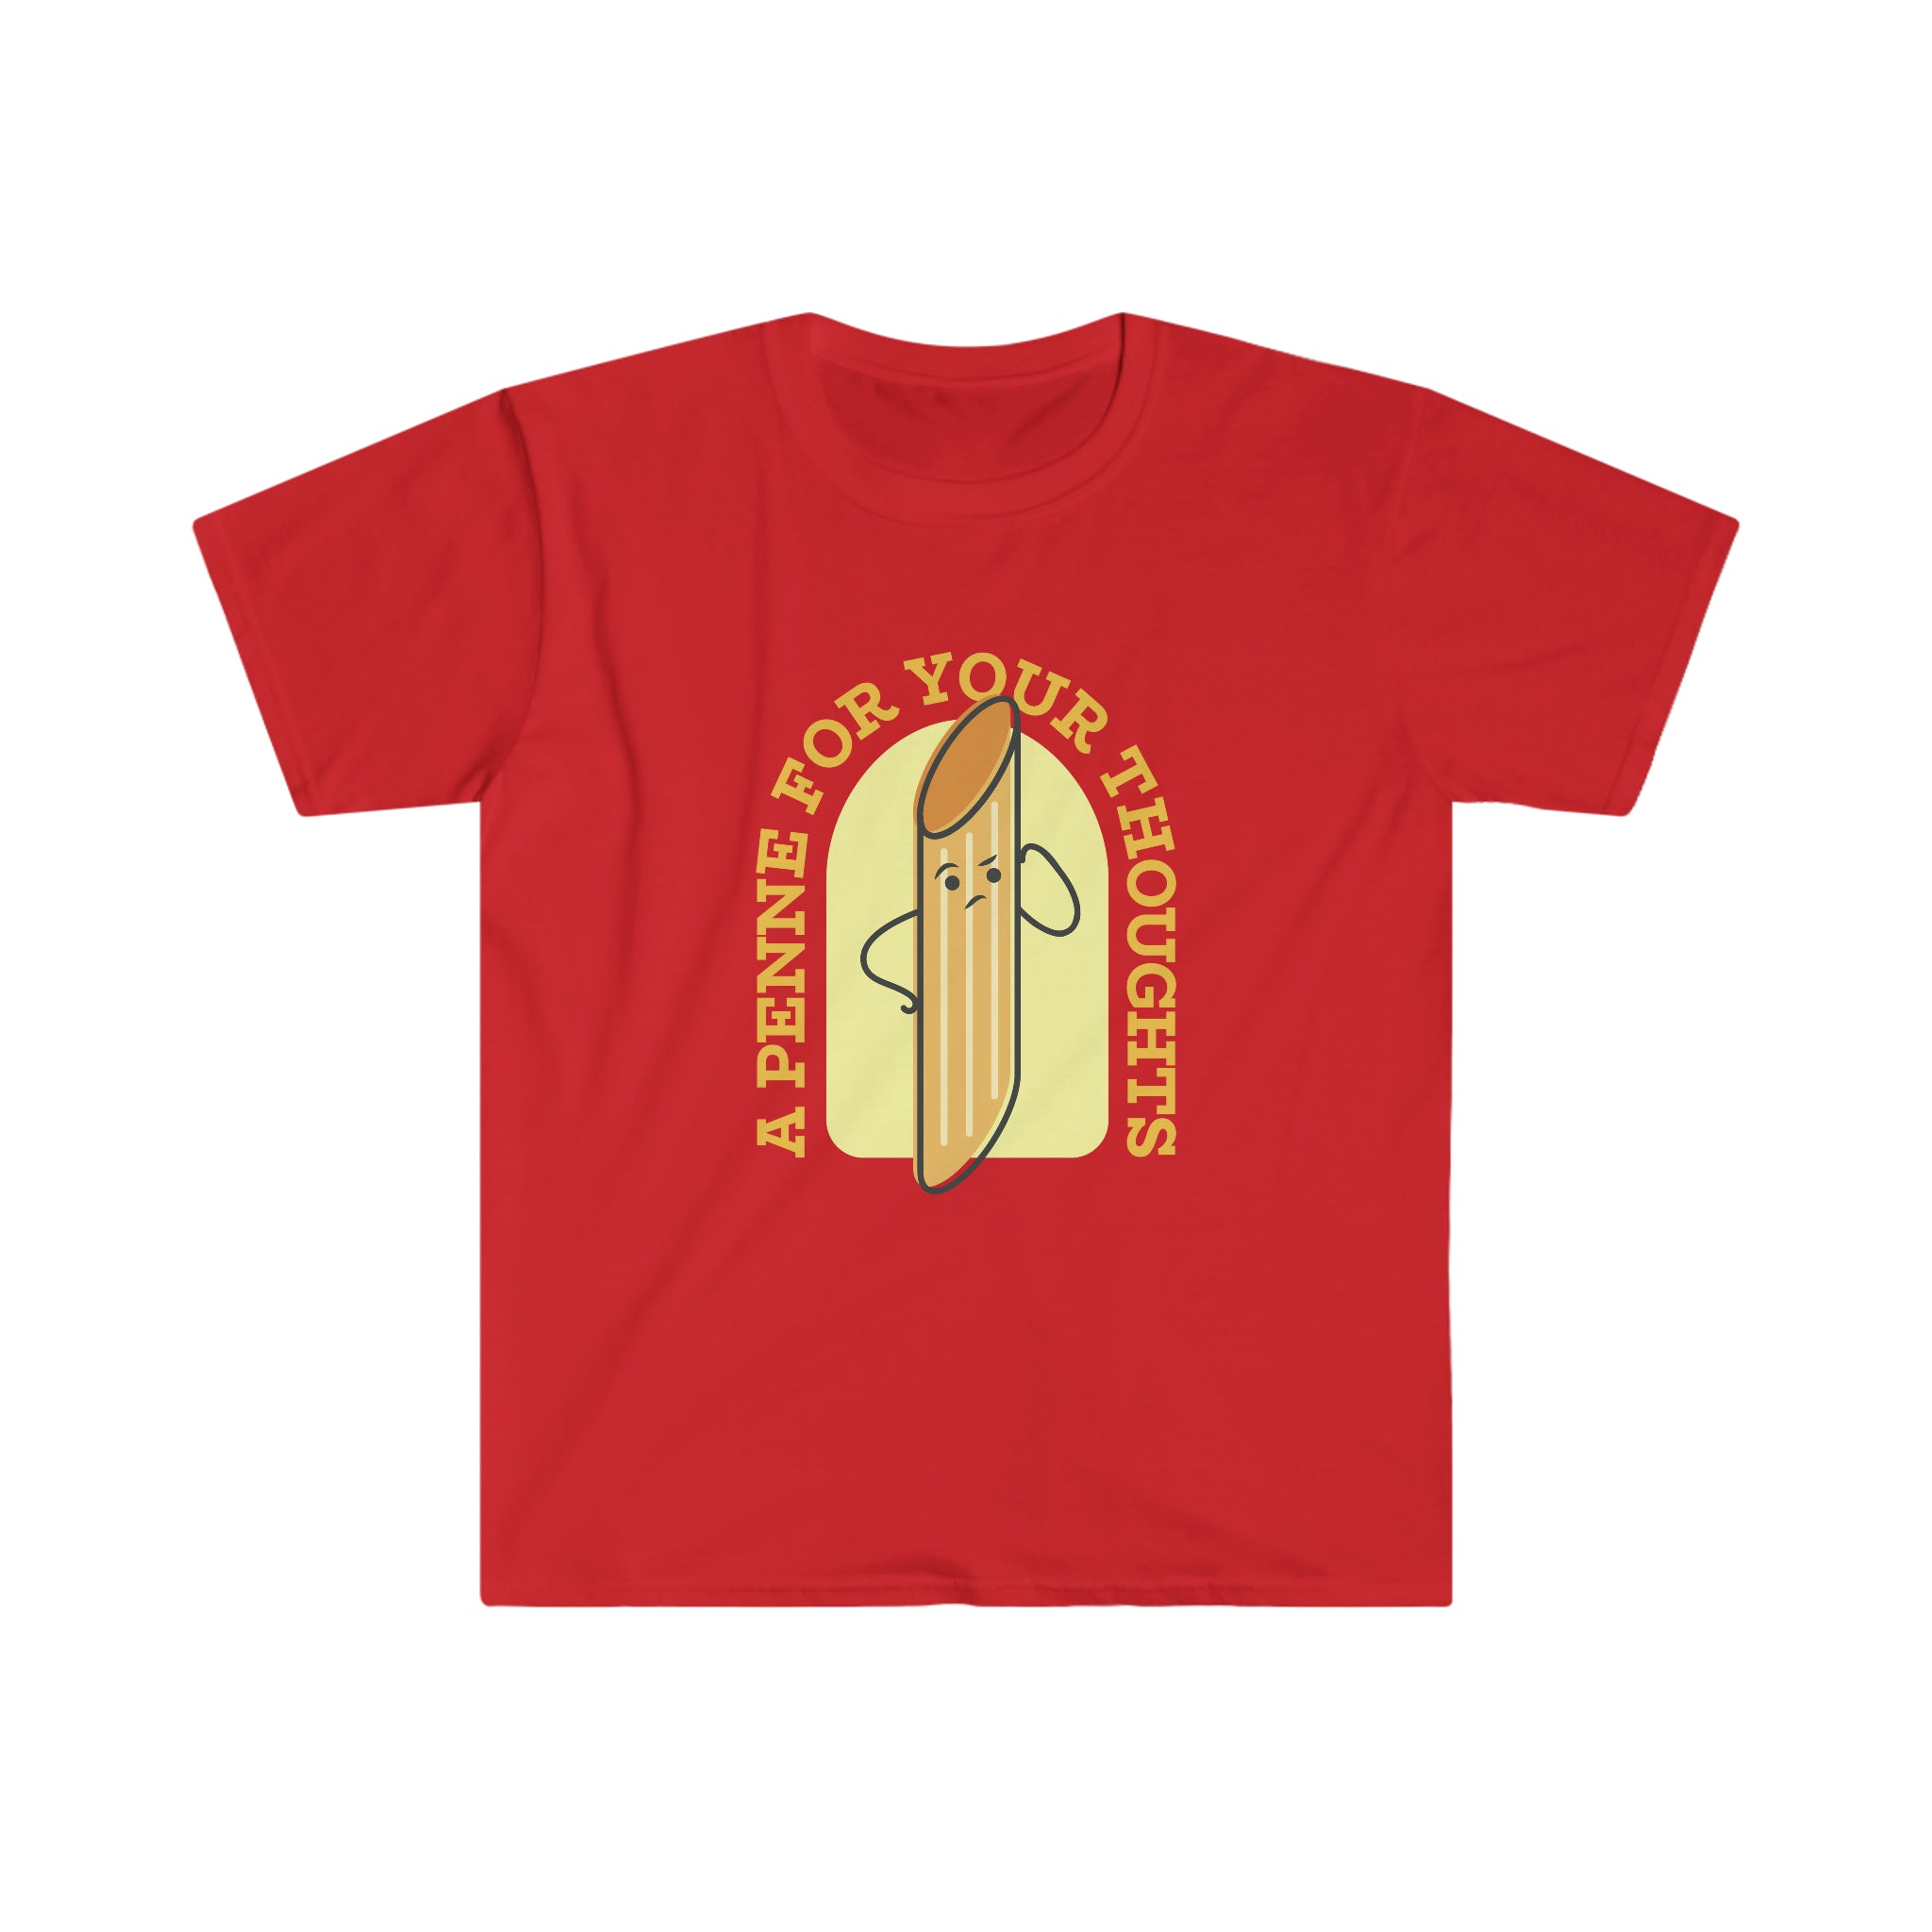 A red t-shirt with an image of A Penne for your thoughts on it.